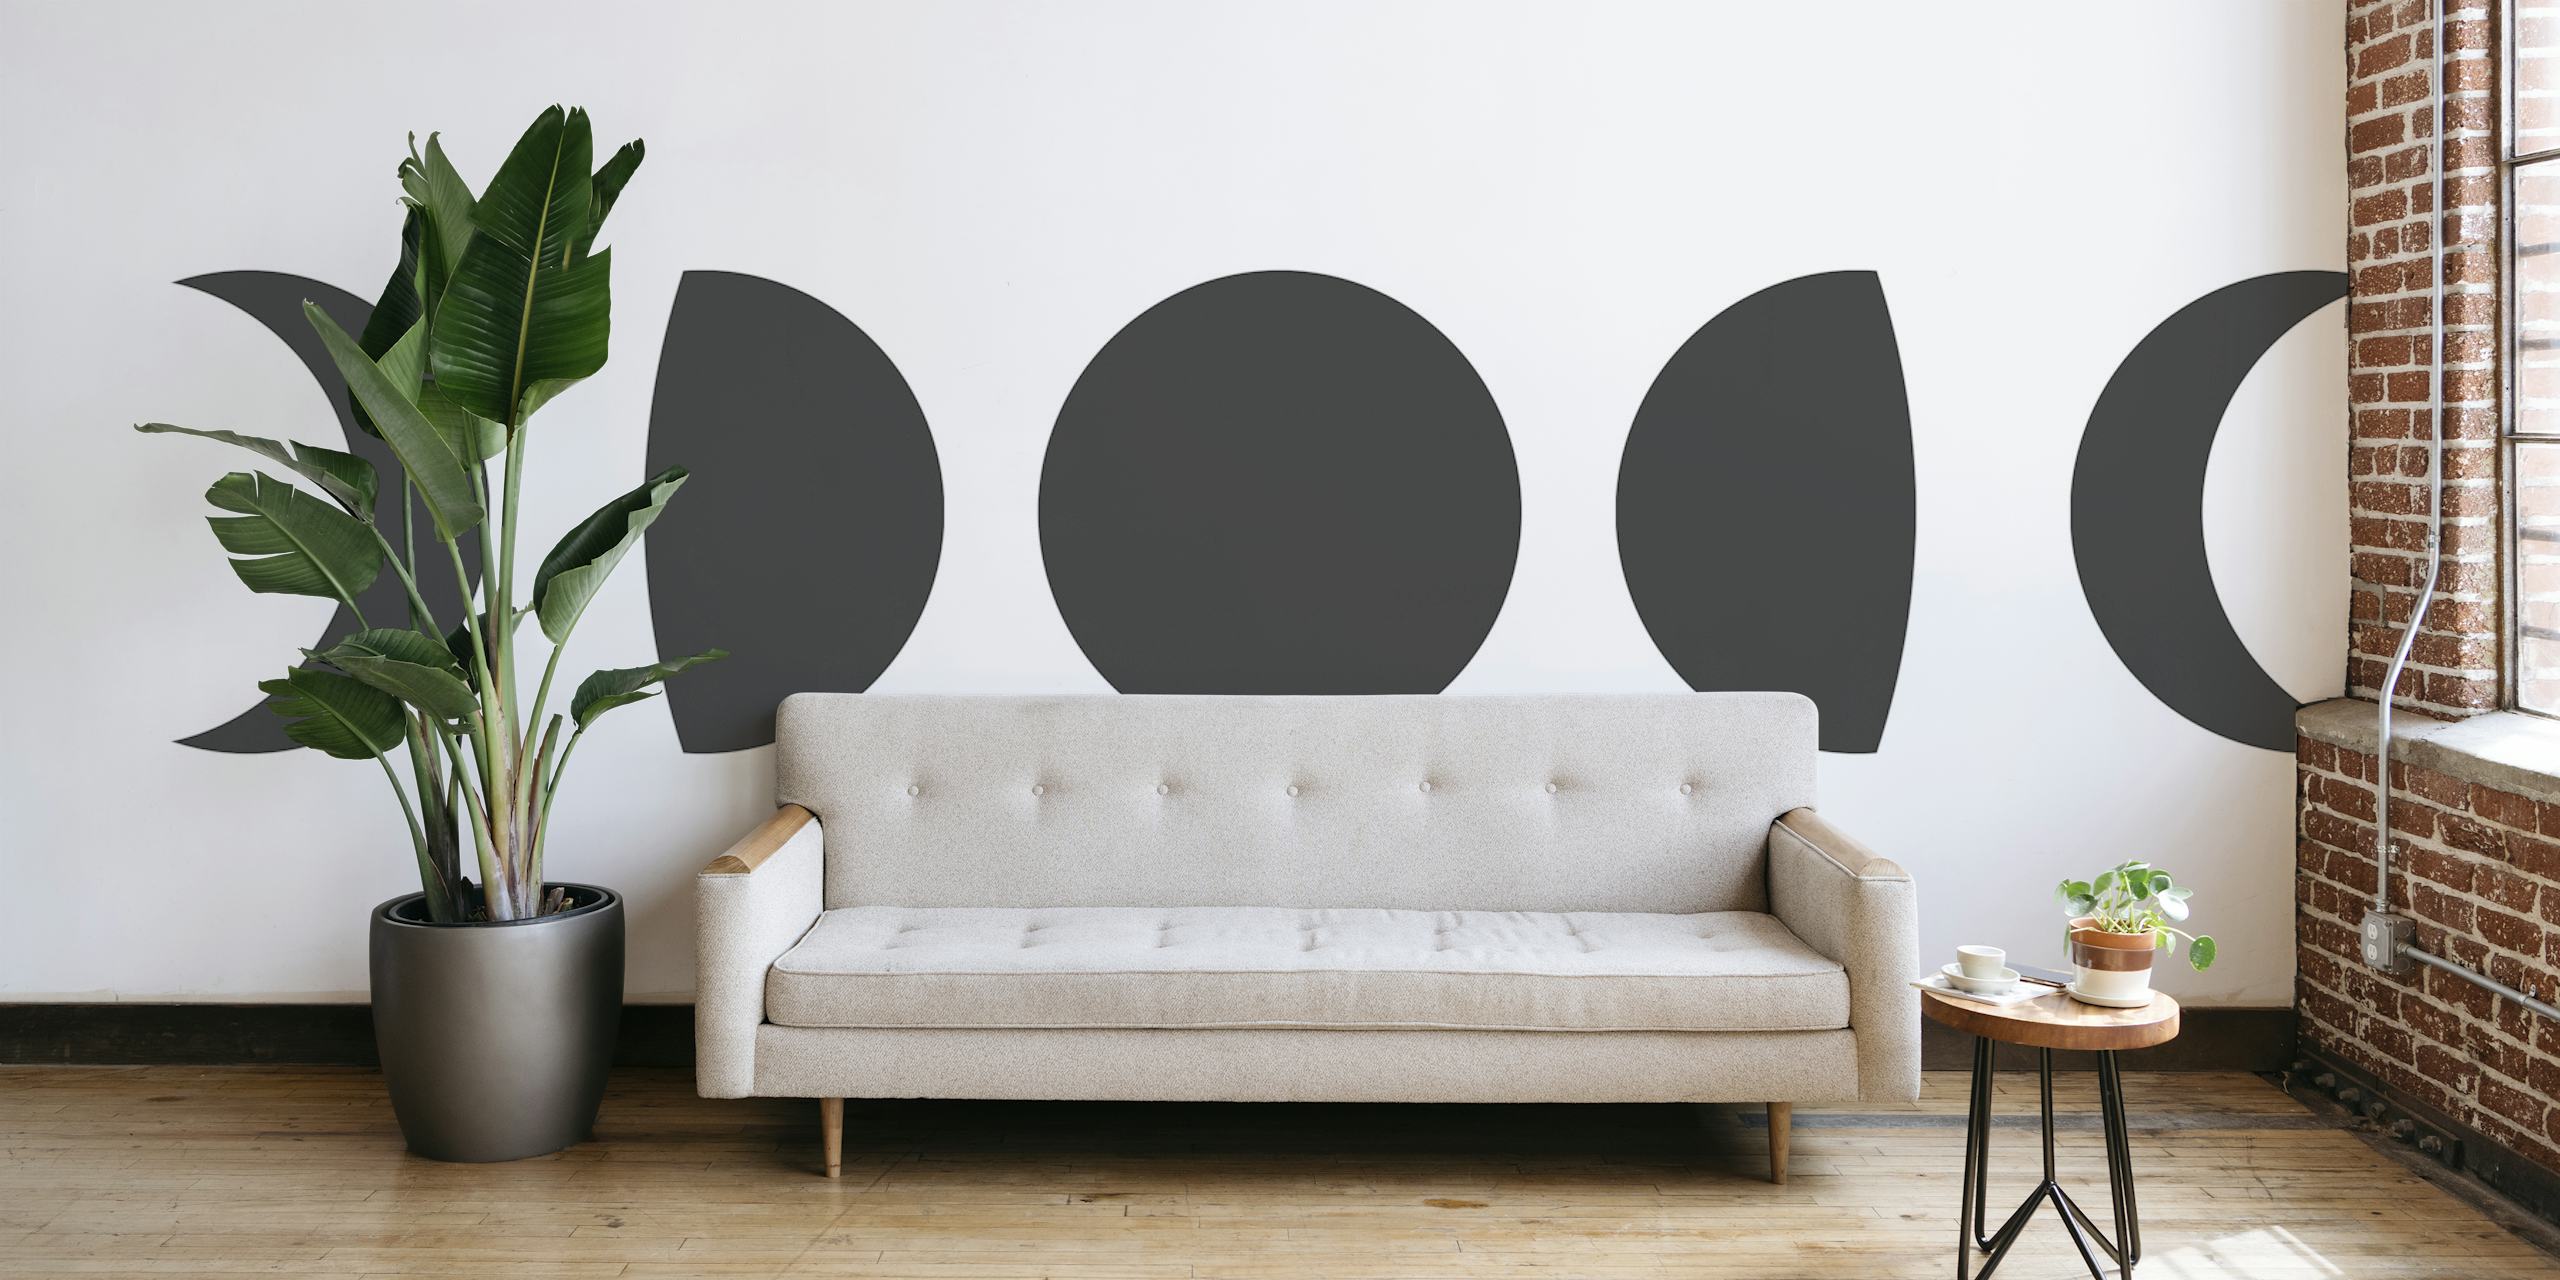 Wall mural of moon phases in a minimalist black and white design